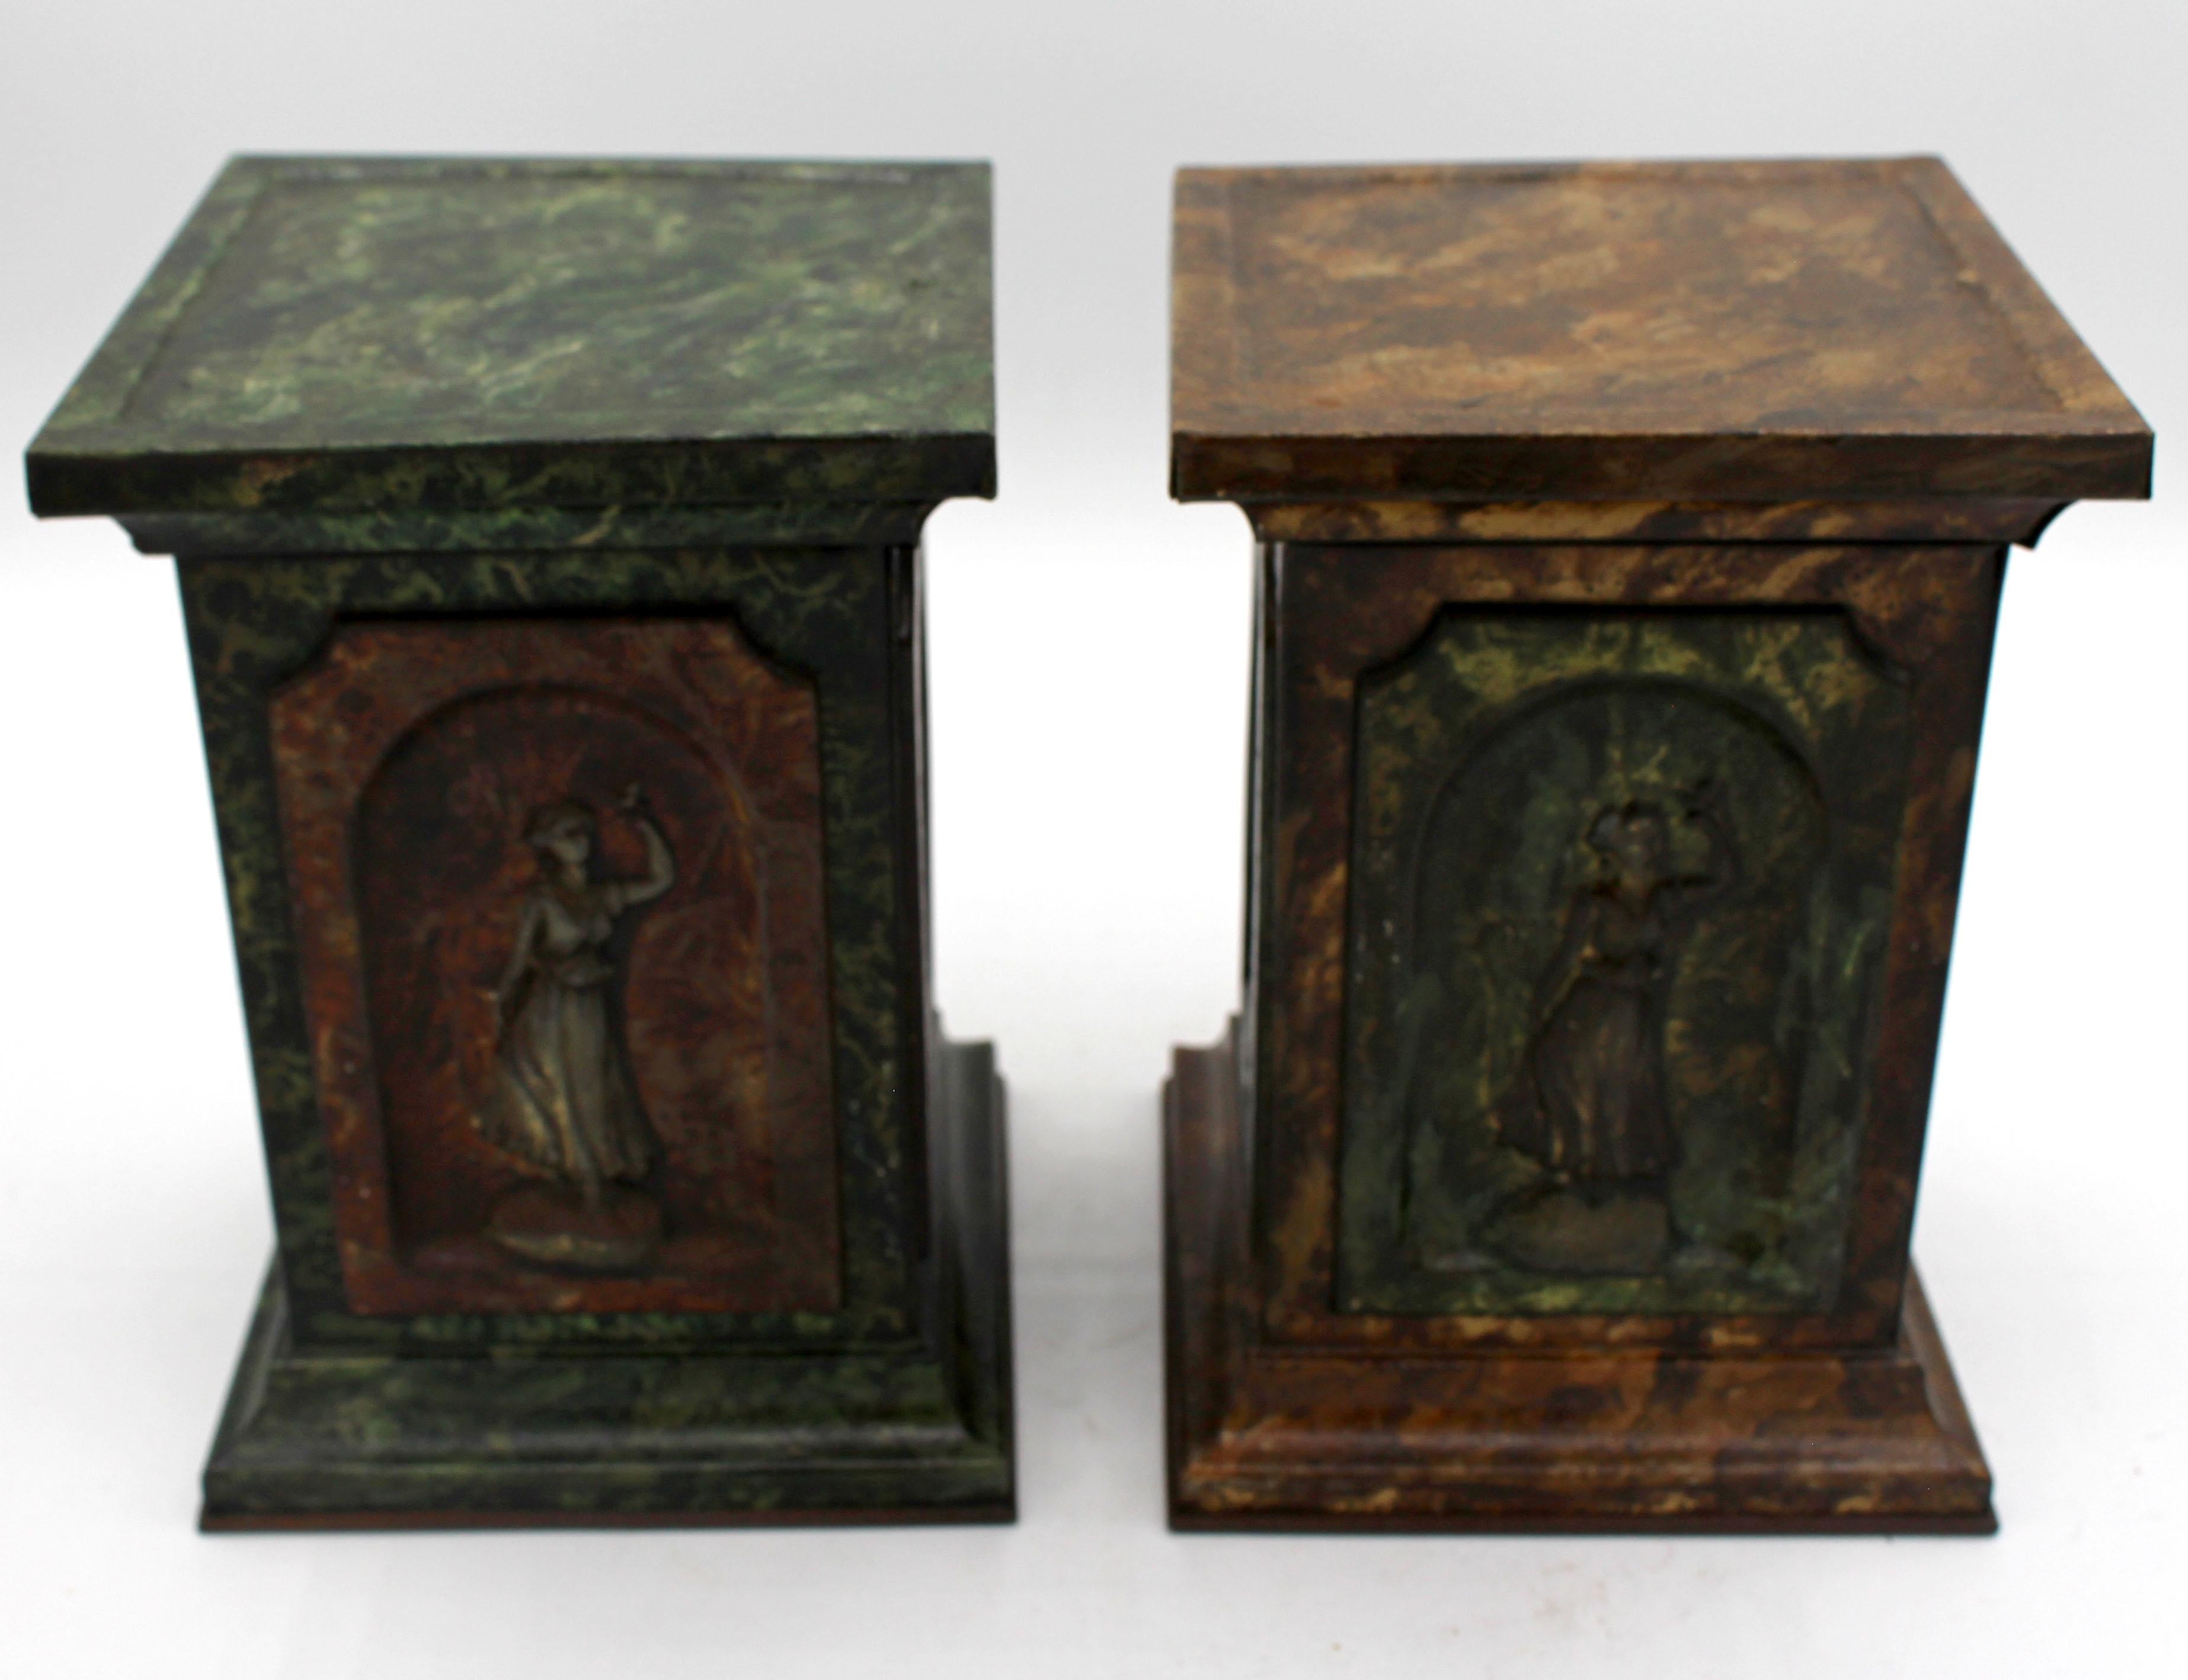 Pair of Huntley & Palmers Sculpture Pedestal Form Biscuit Tin Boxes, circa 1909 In Good Condition For Sale In Chapel Hill, NC